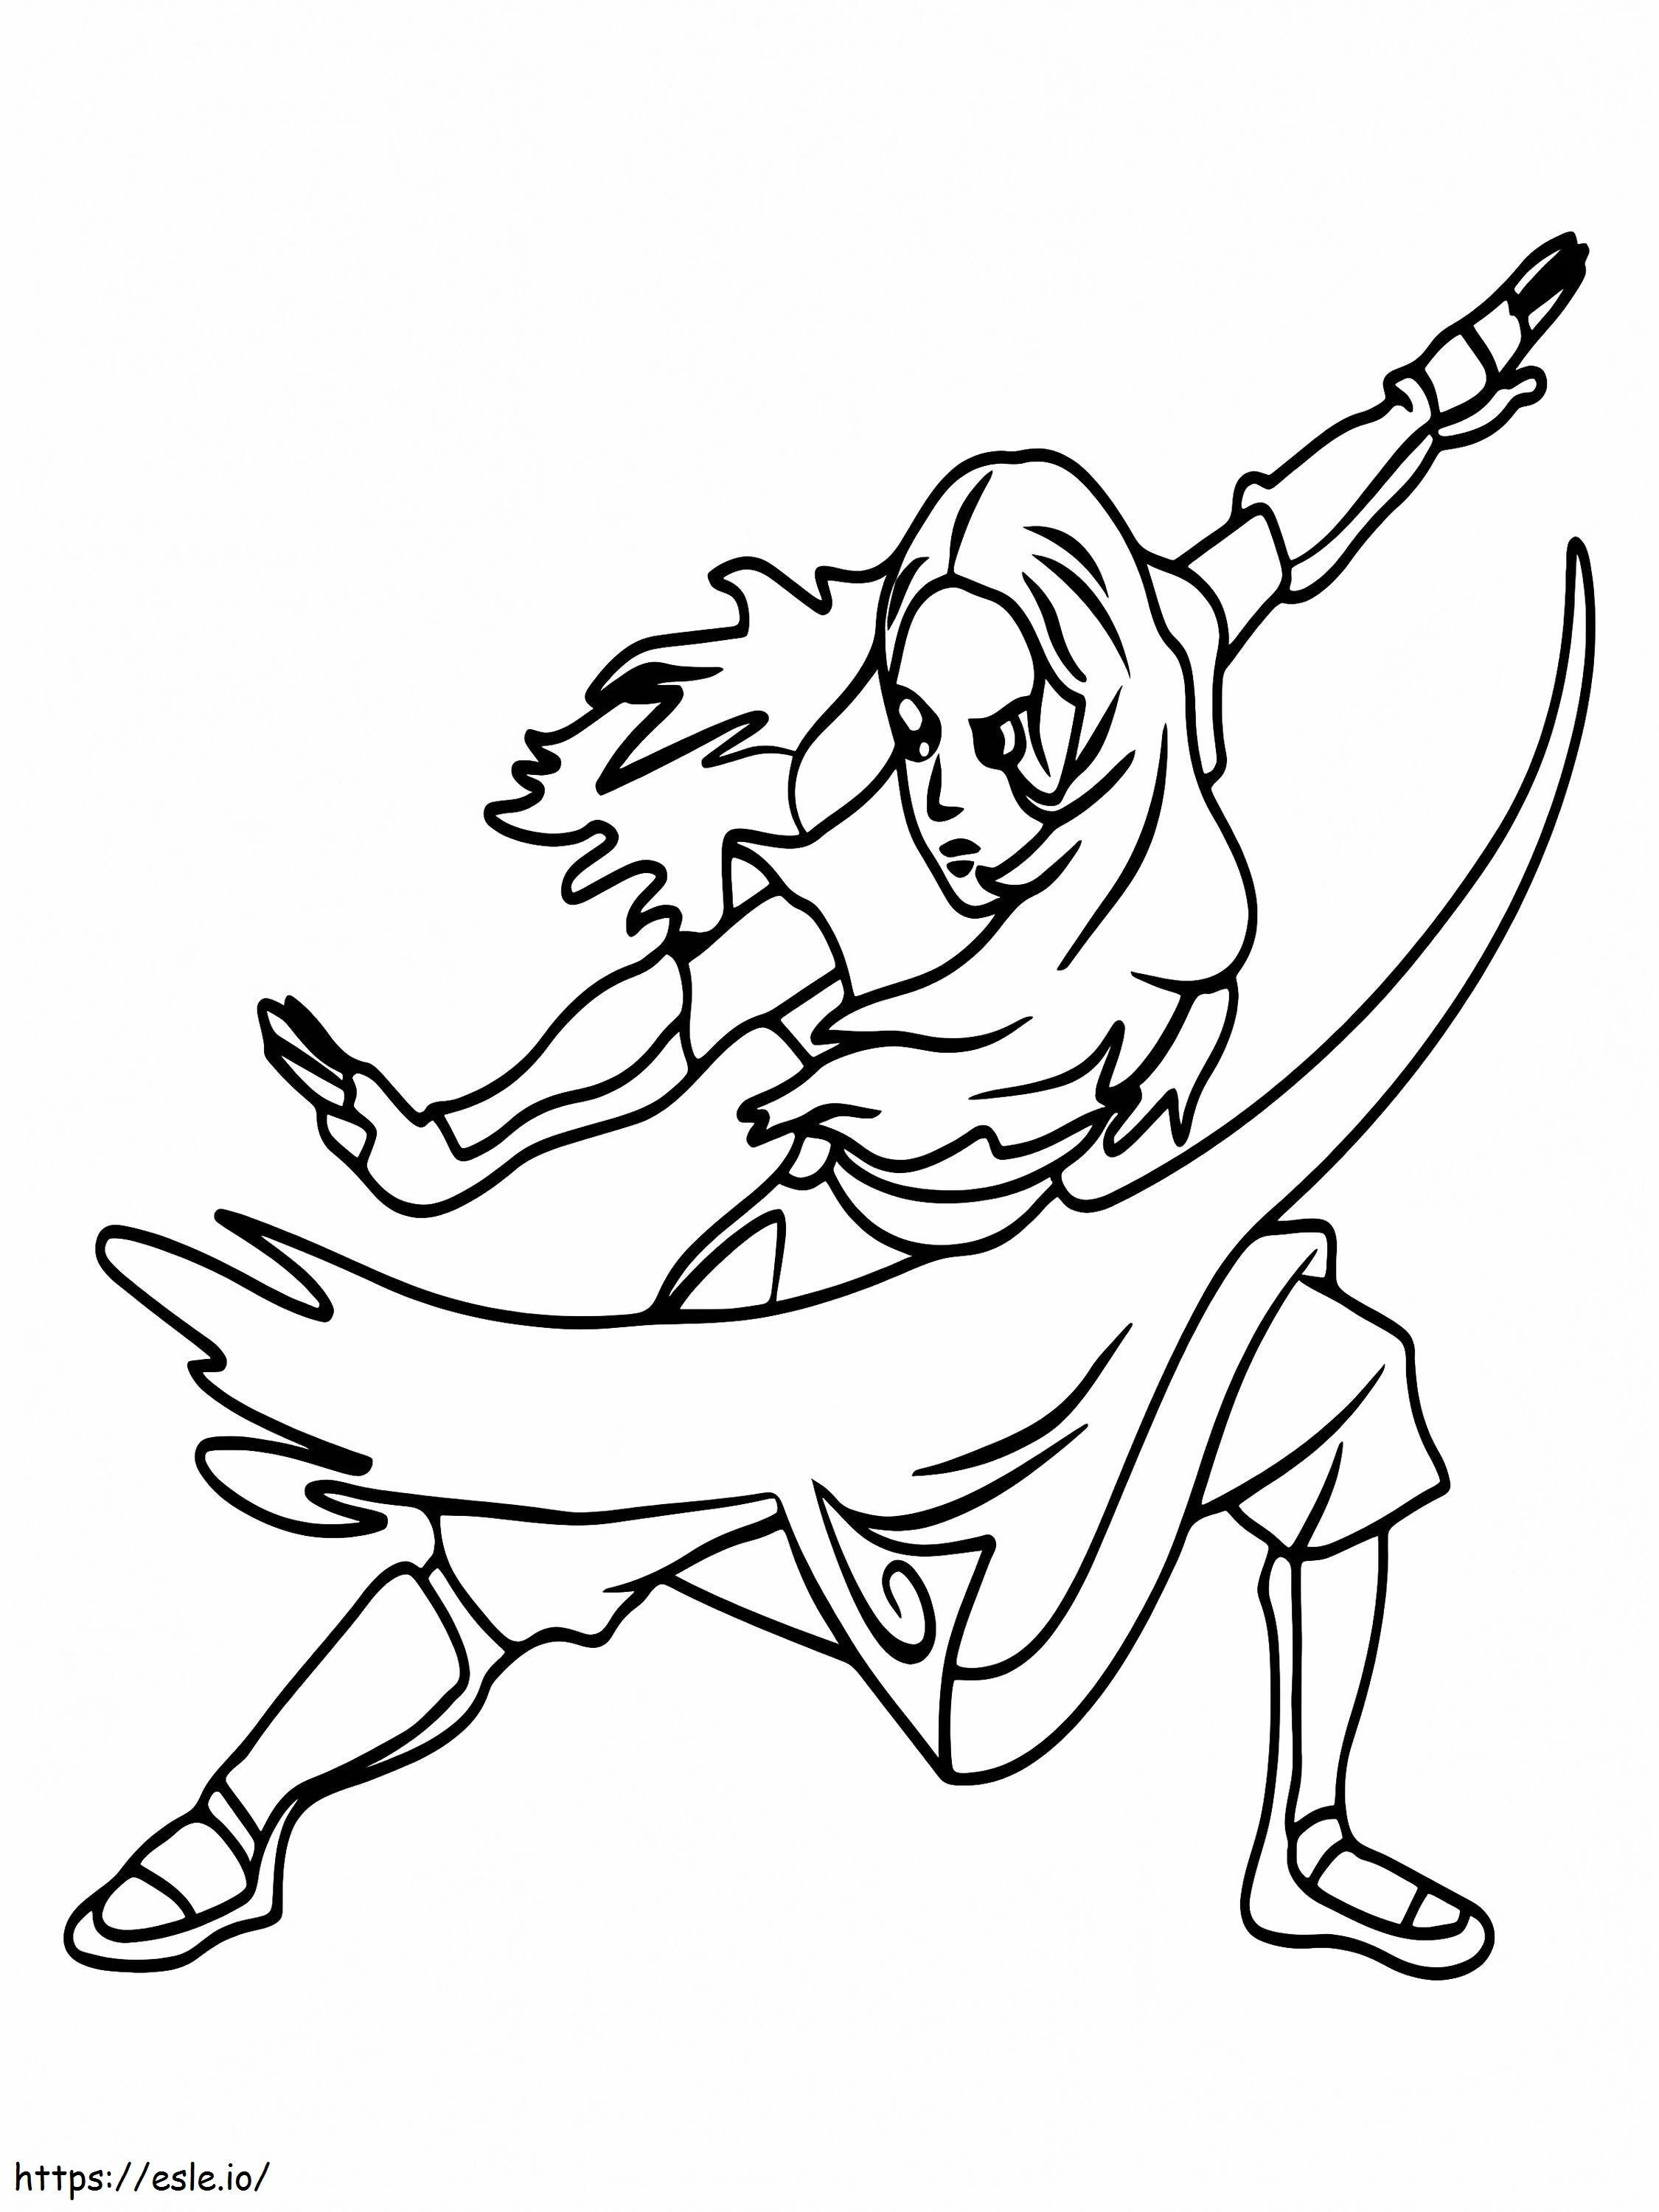 Waterbending Style The Legend Of Korra coloring page